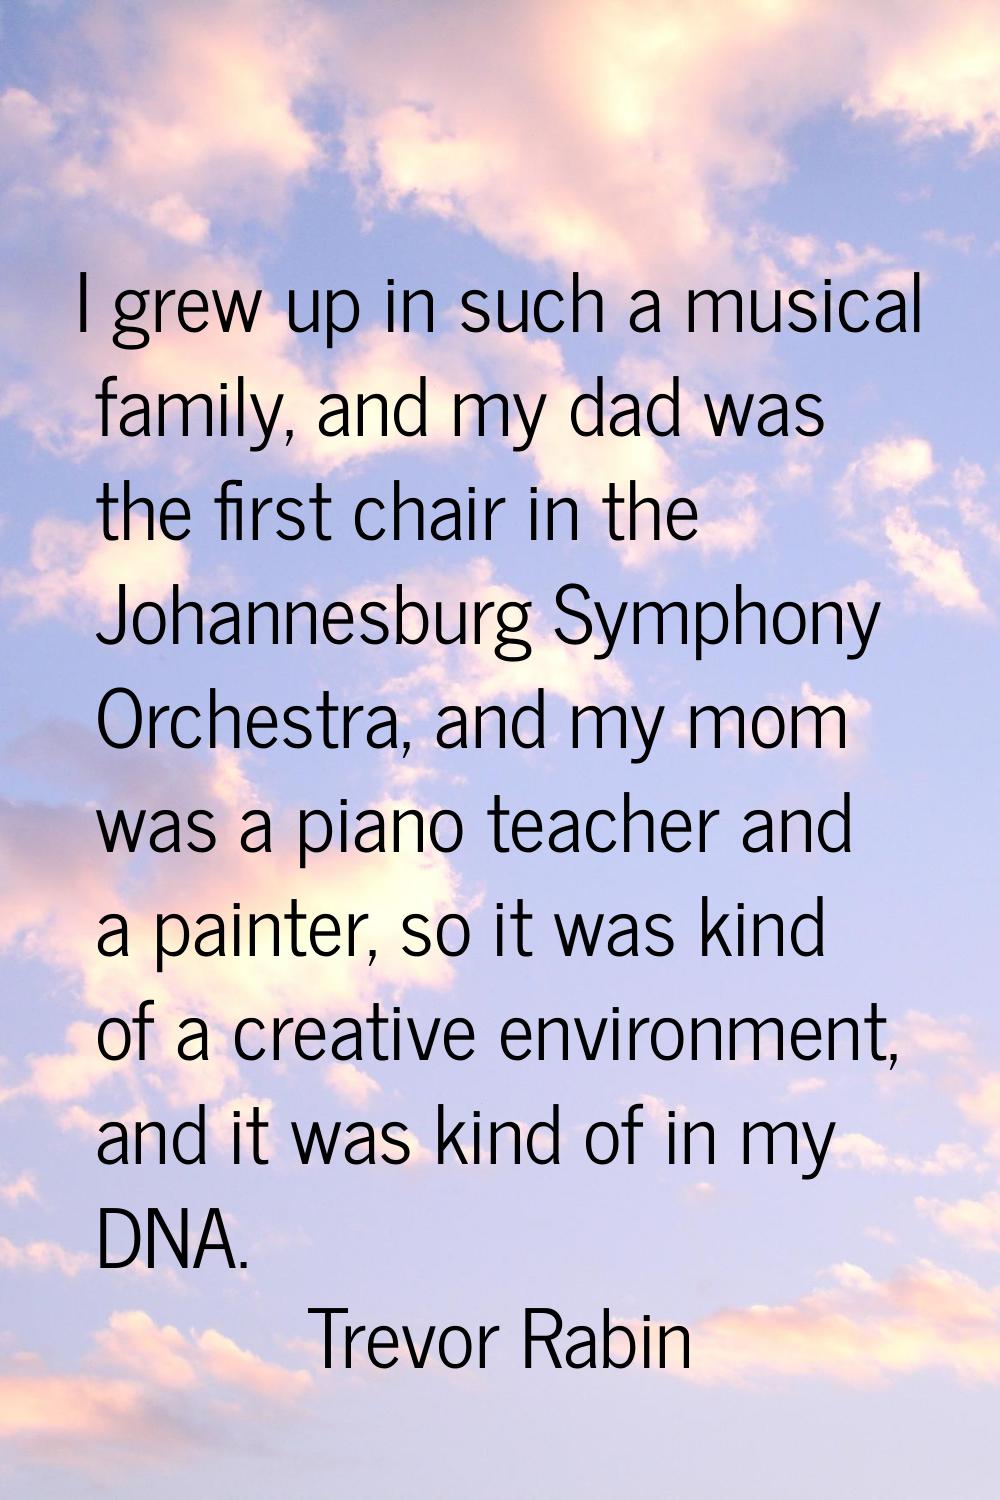 I grew up in such a musical family, and my dad was the first chair in the Johannesburg Symphony Orc